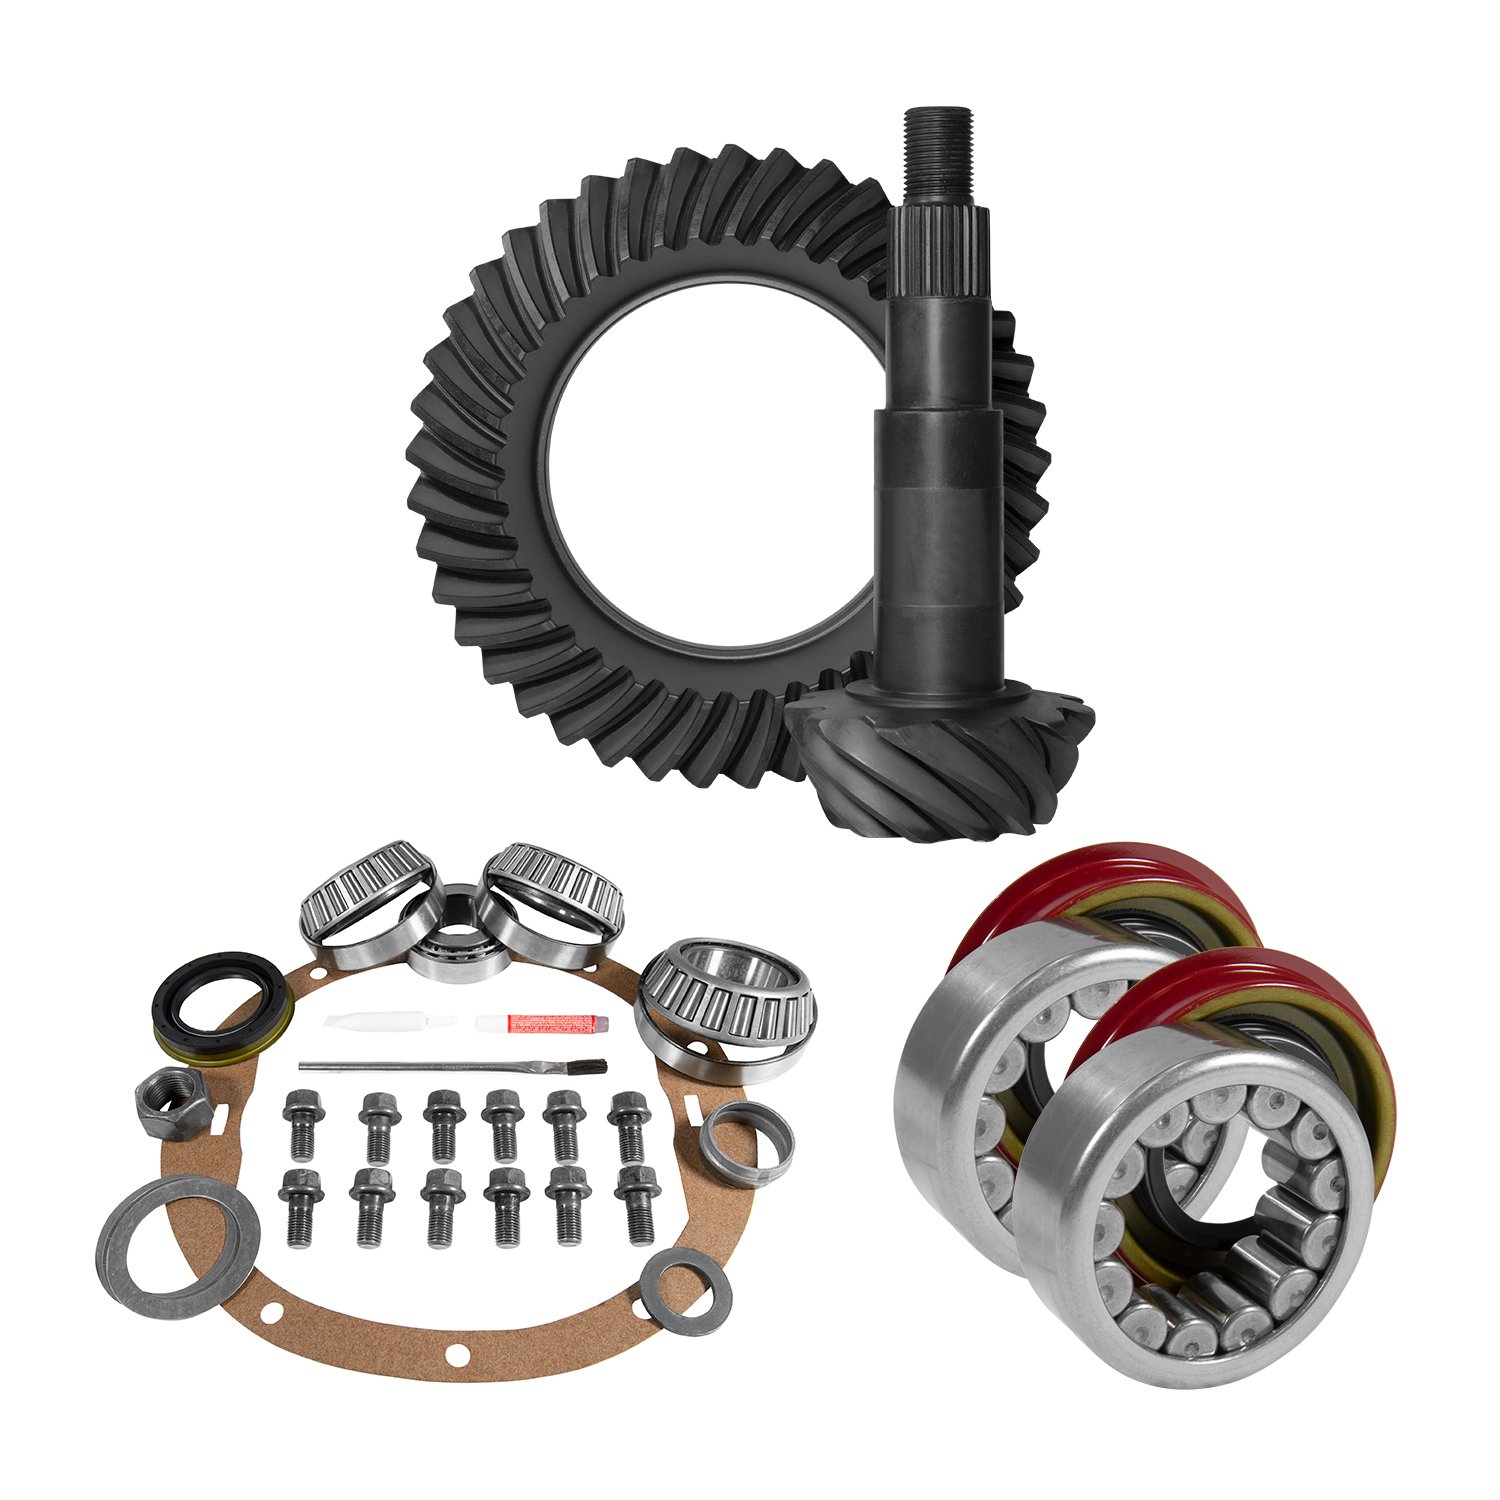 USA Standard 10721 8.5 in. GM 4.88 Rear Ring & Pinion Install Kit, Axle Bearings, 1.78 in. Case Journal